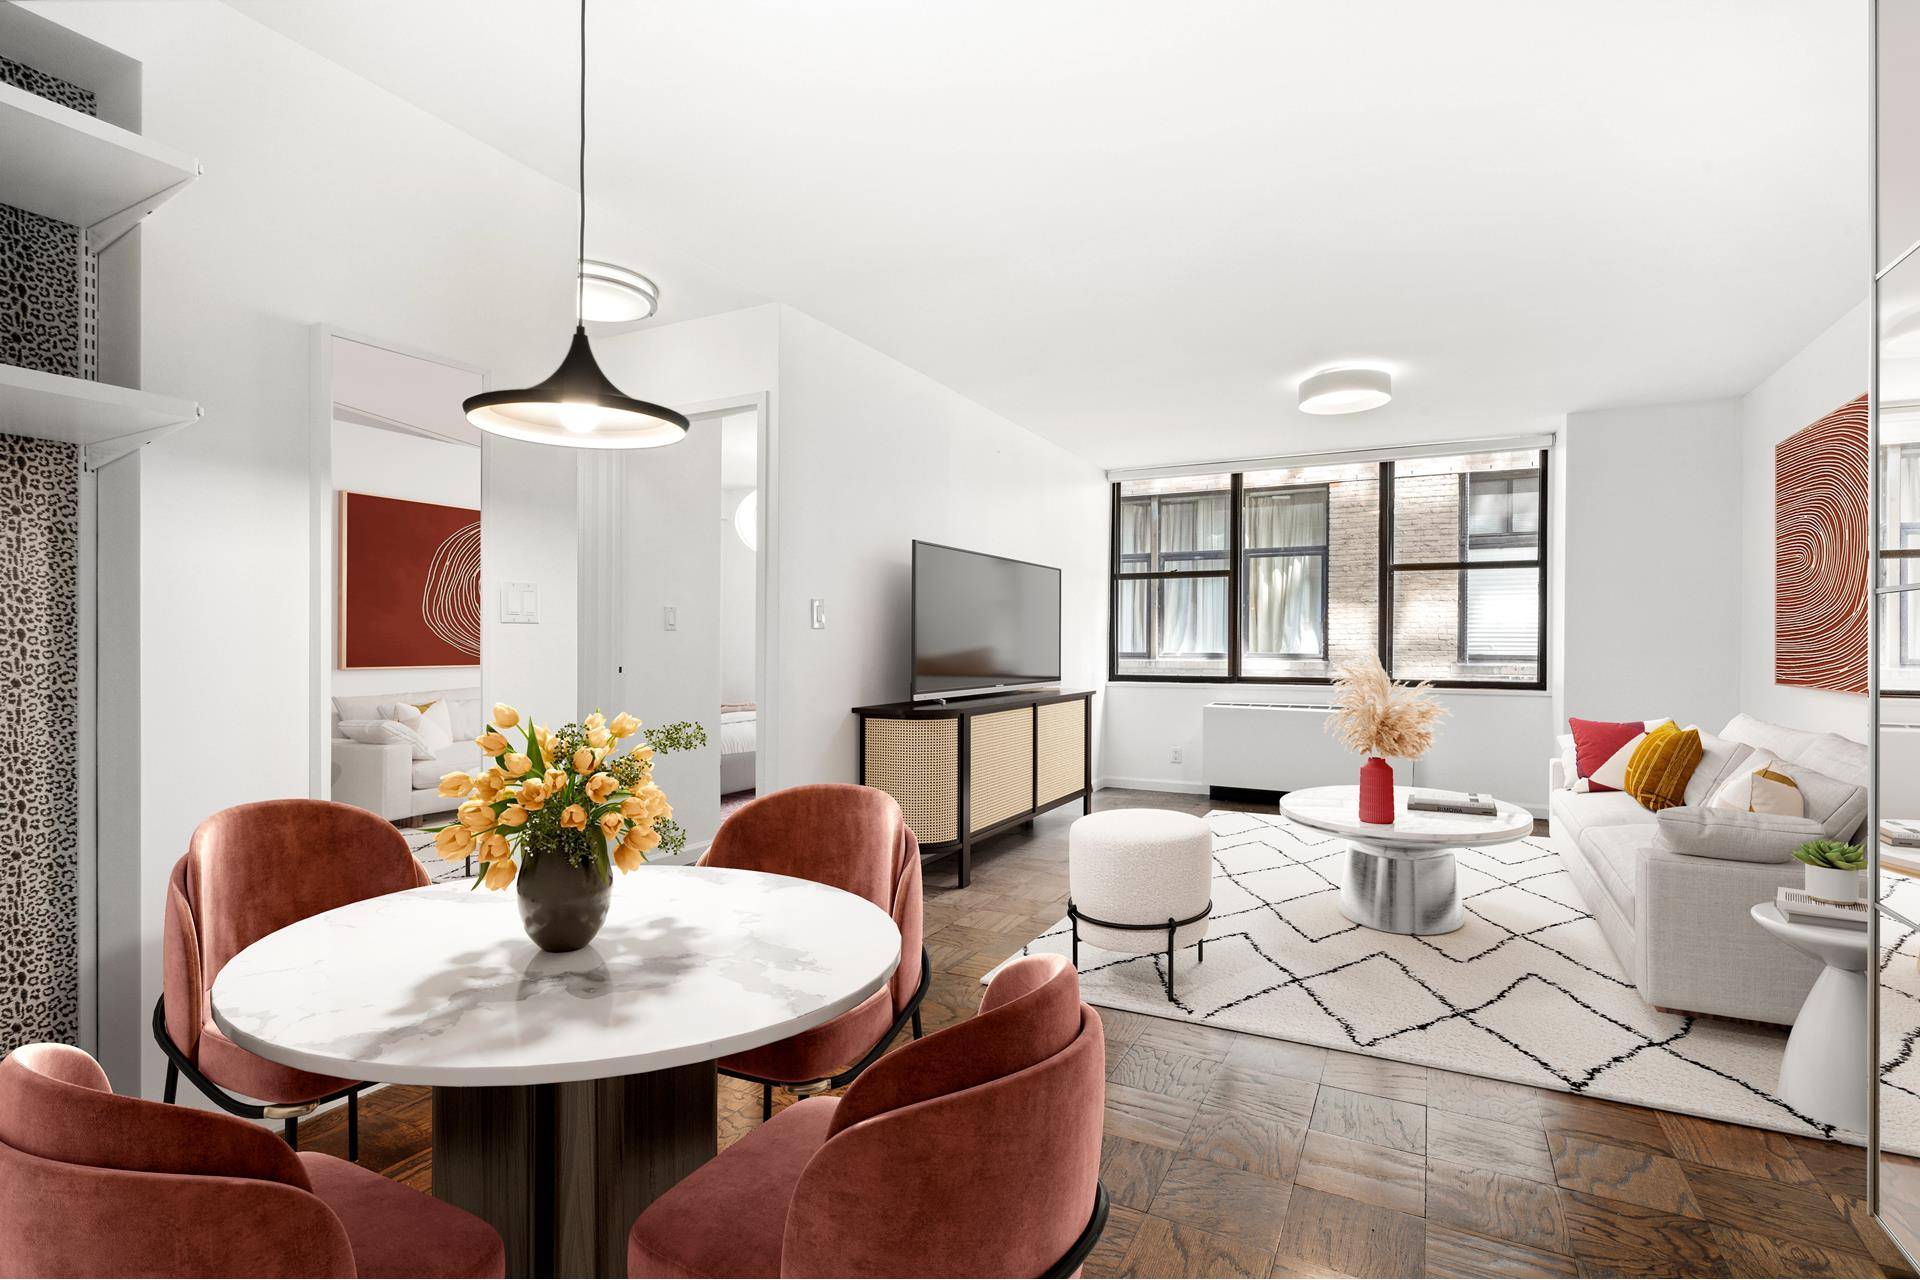 The Delegate Condominium is a full service 24 hour luxury doorman building, conveniently surrounded by numerous coffee shops, restaurants, Grand Central station, and The United Nations.